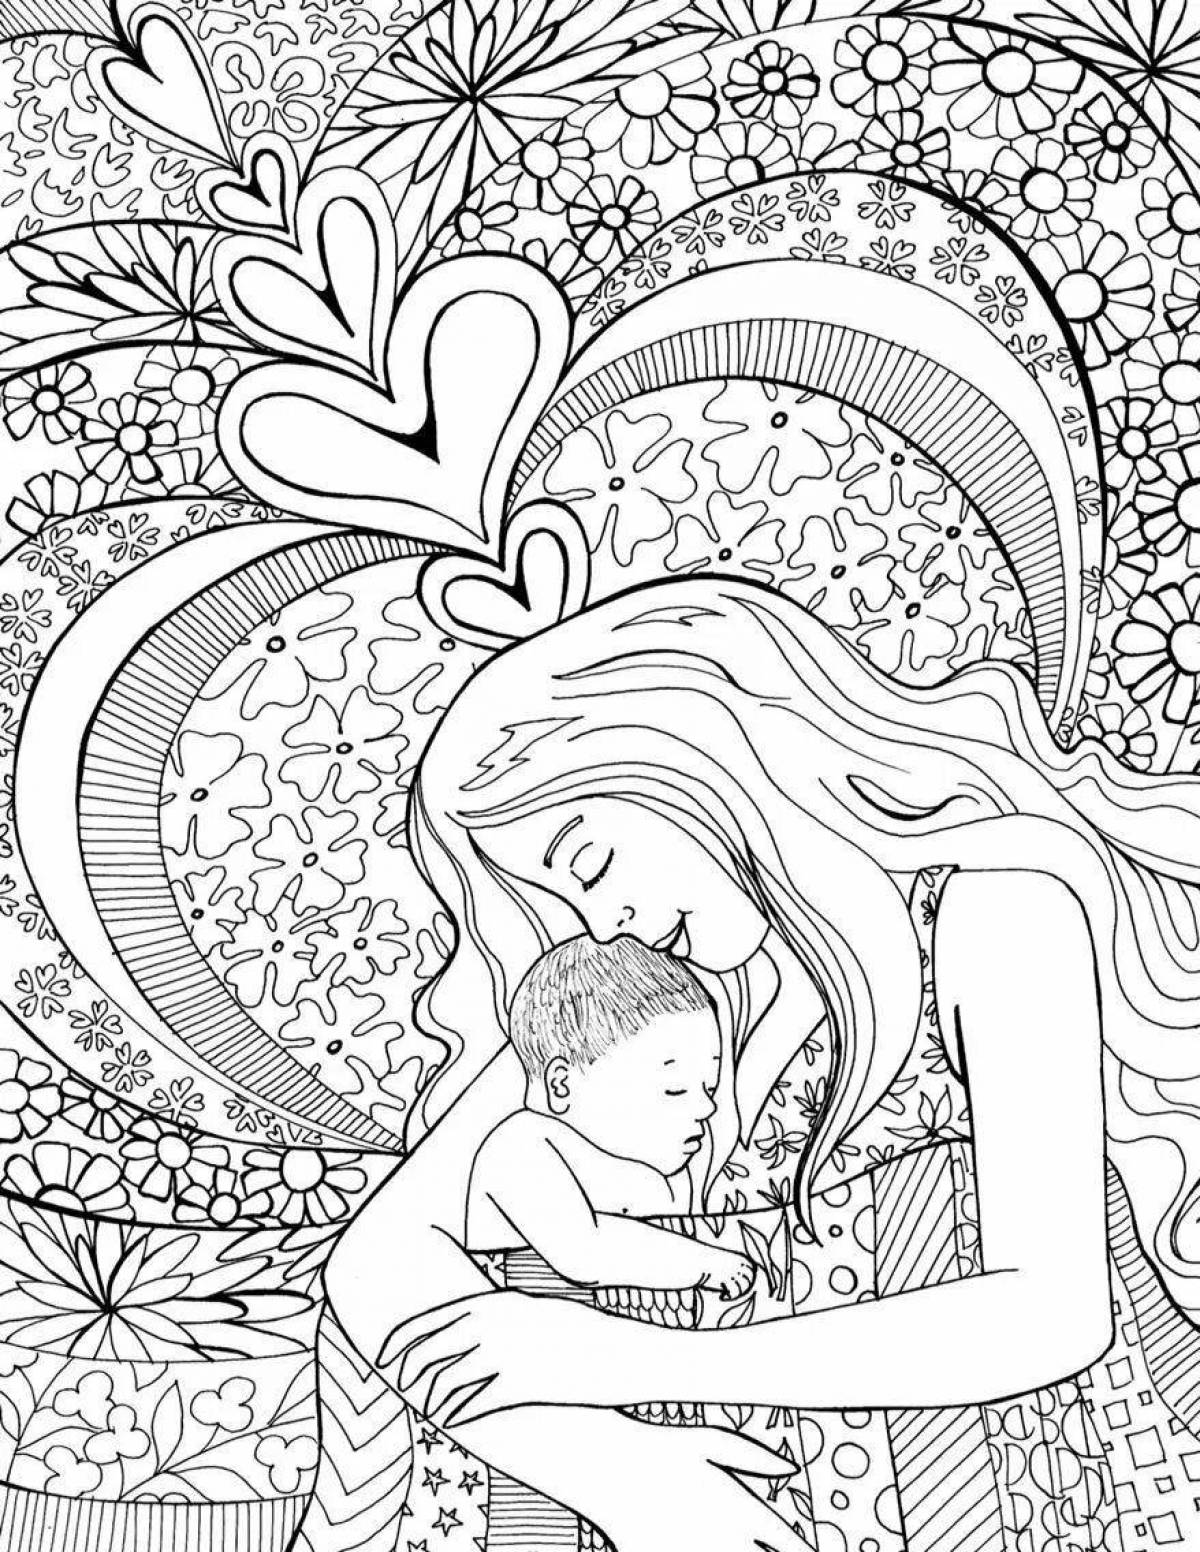 Healing pregnancy coloring page